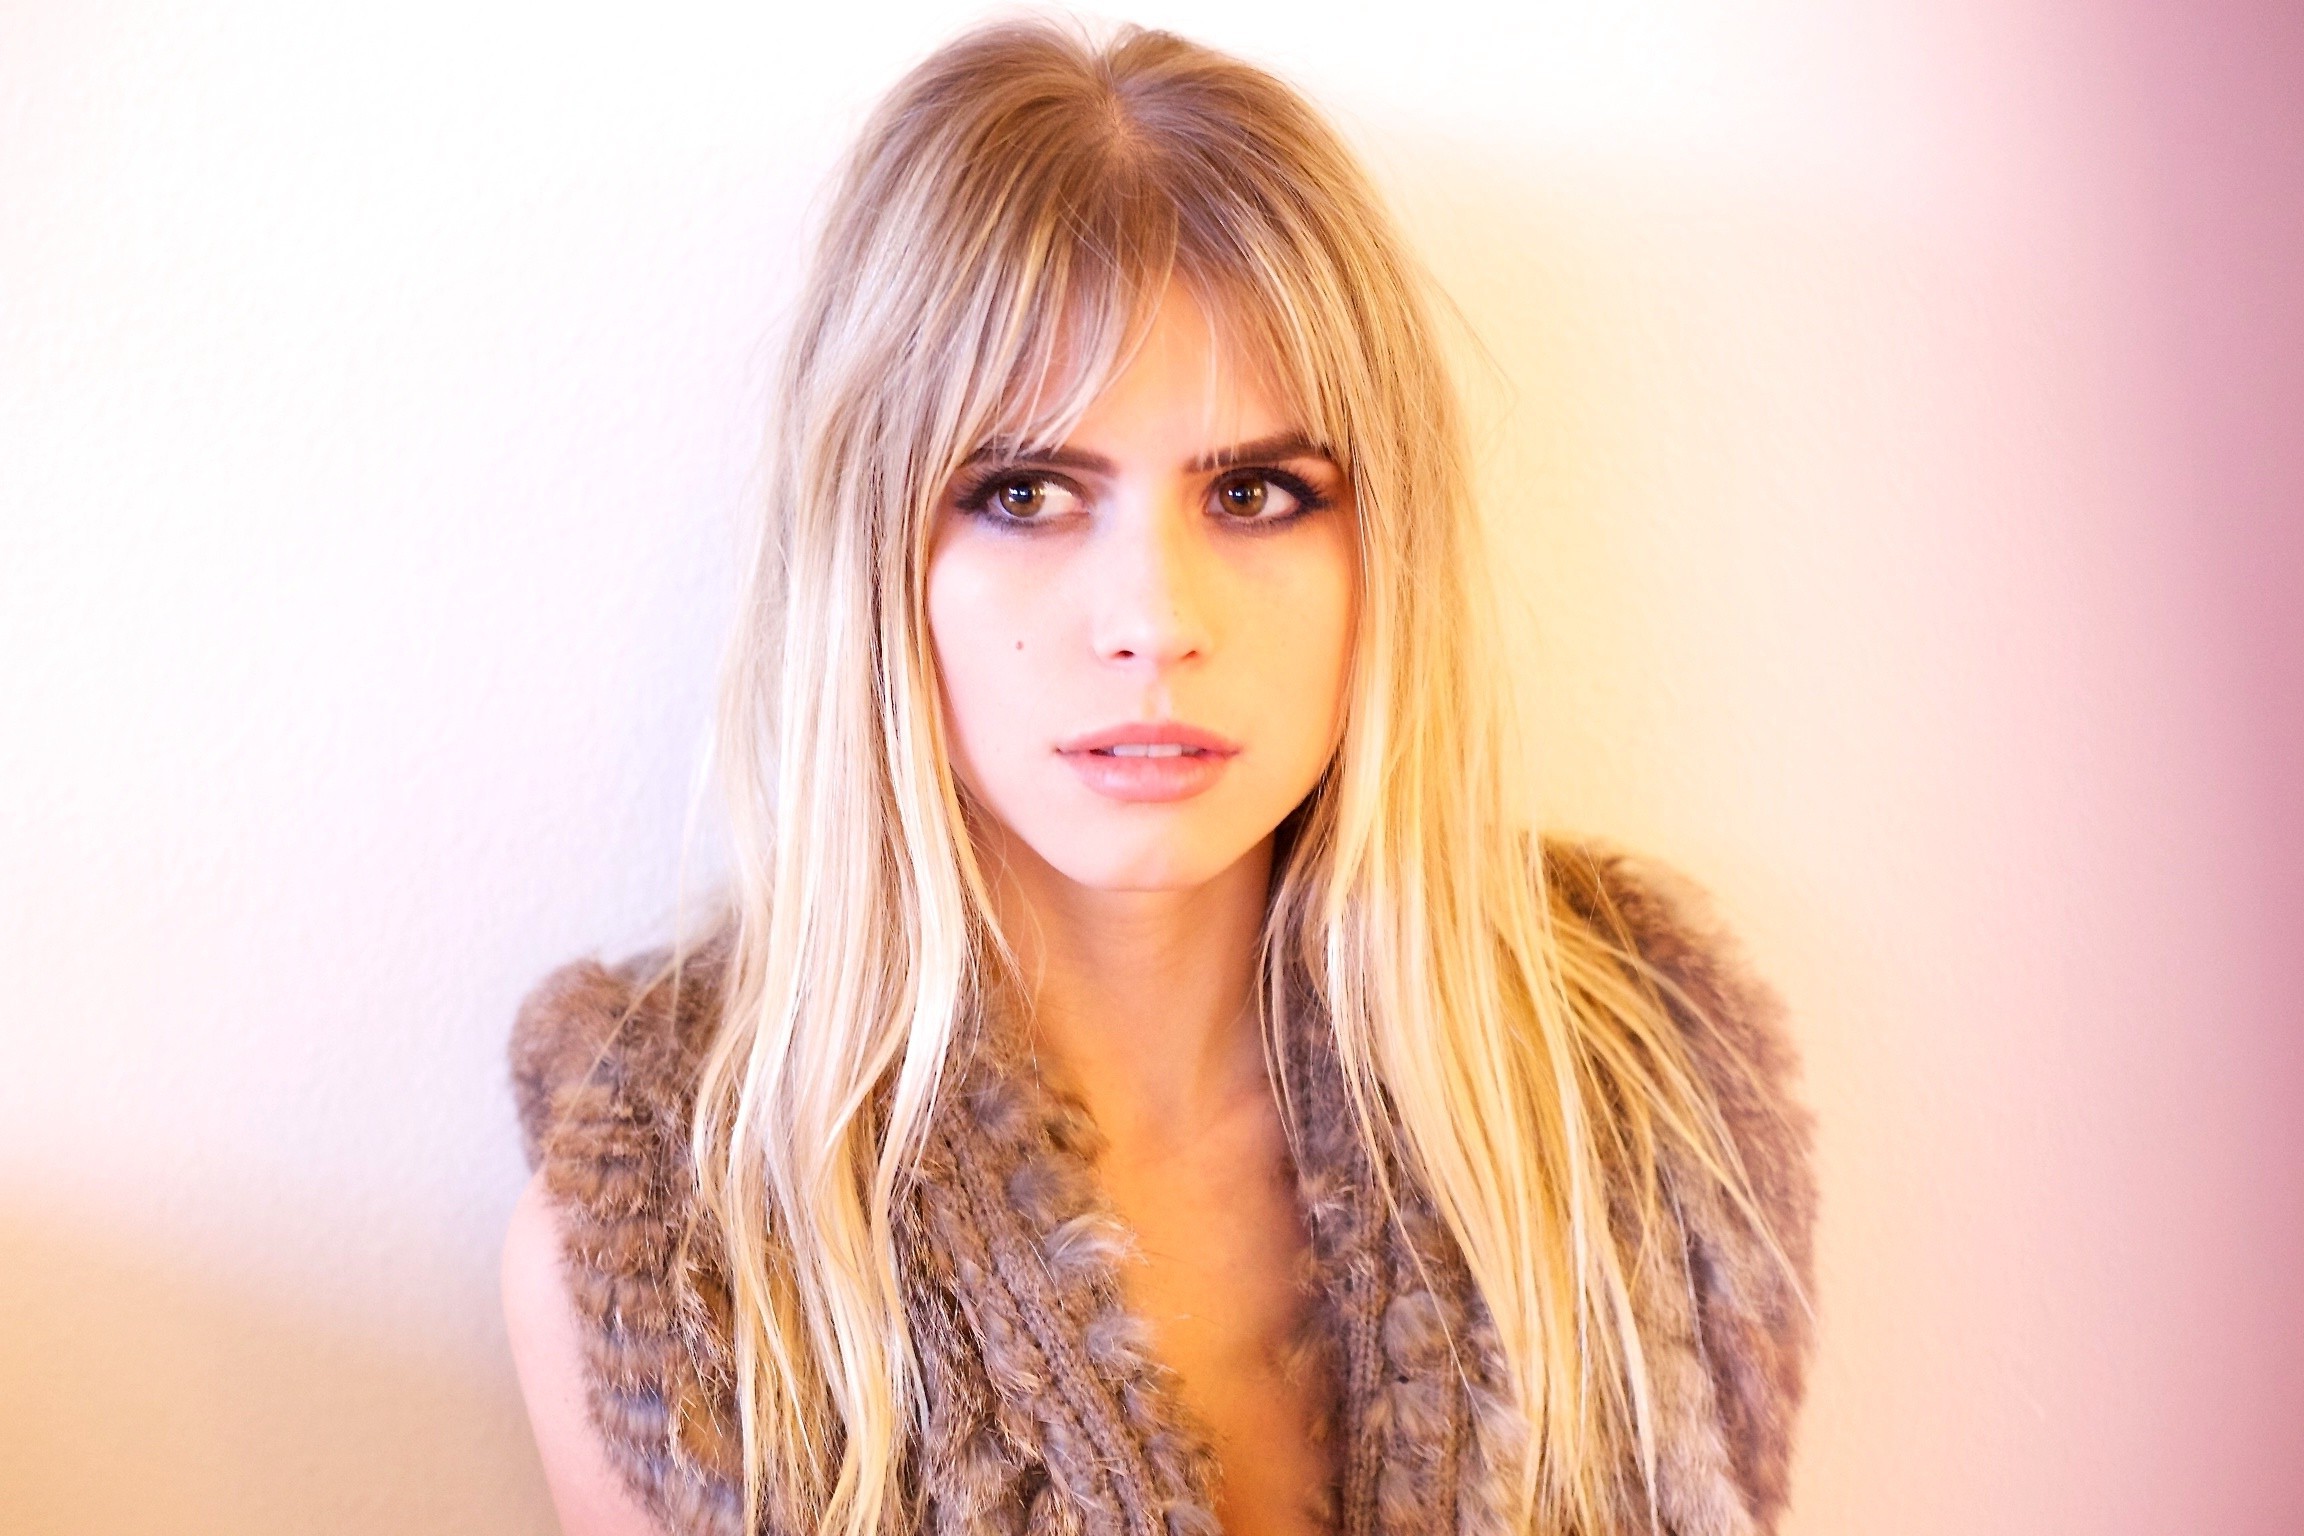 women, Blonde, Looking Away, Face, Carlson Young, Actress, Celebrity, Against Wall, Brown Eyes Wallpaper